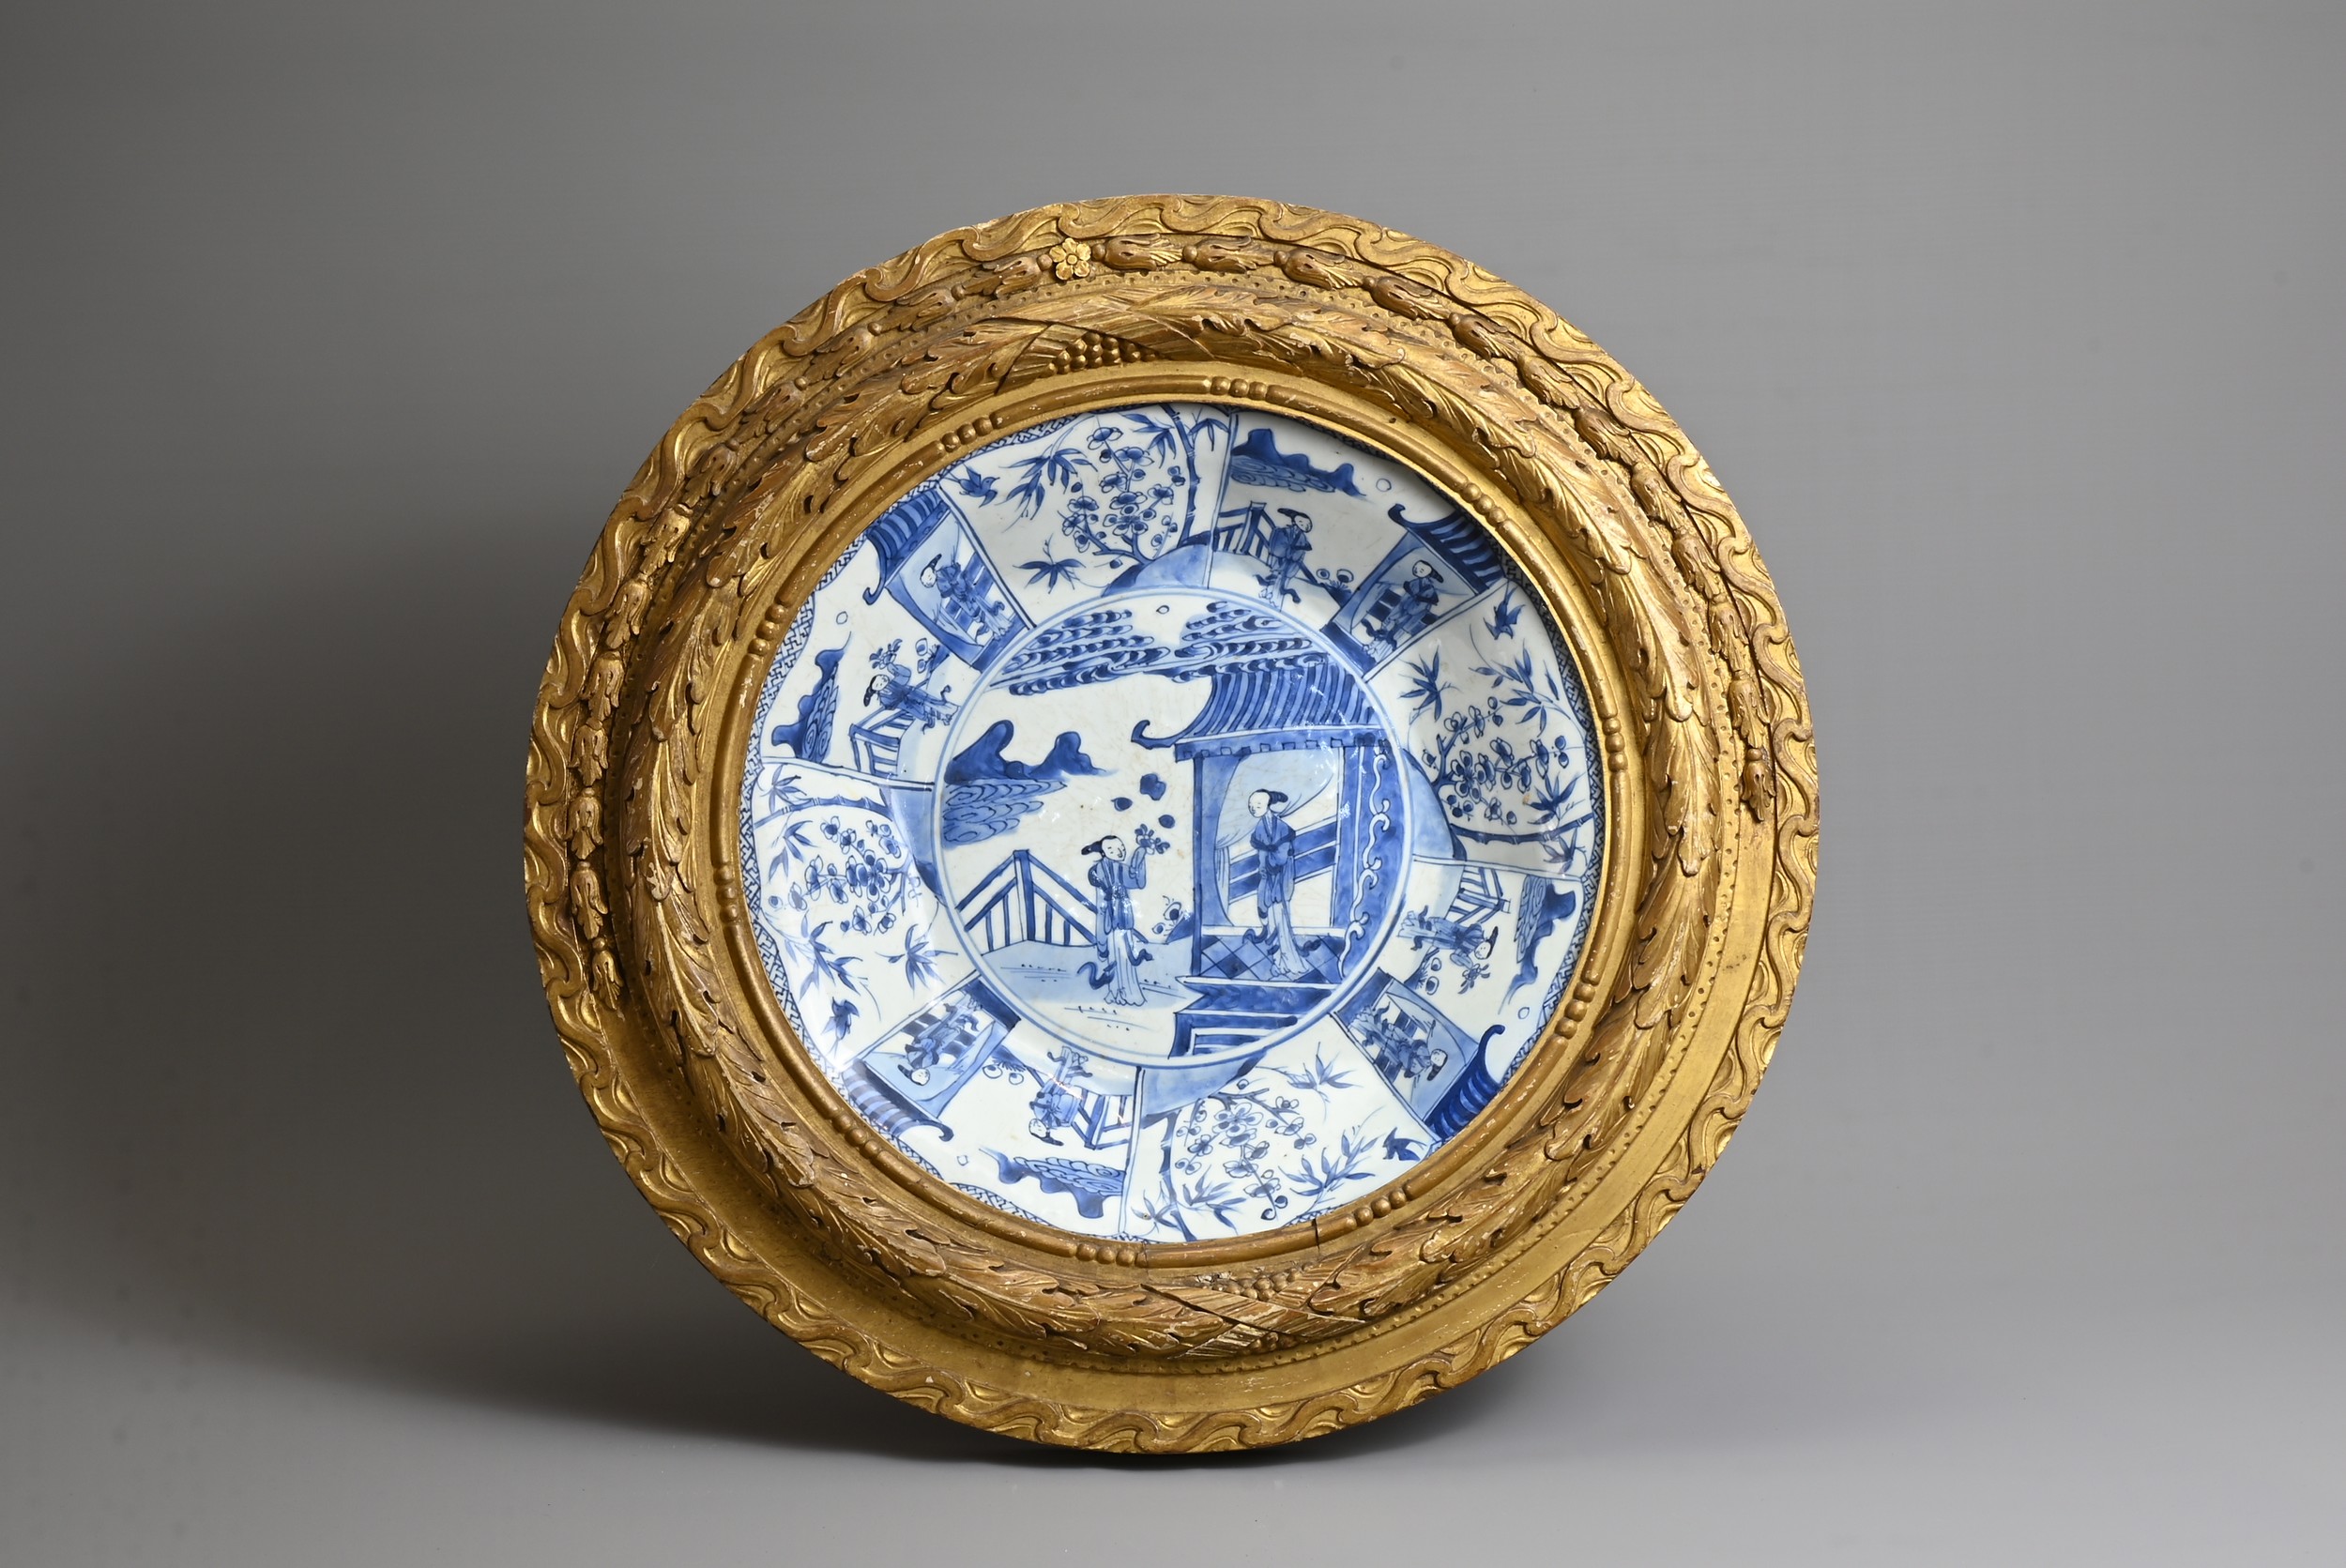 A LARGE CHINESE BLUE AND WHITE PORCELAIN DISH, 18TH CENTURY. The dish with octagonal lobbed sides